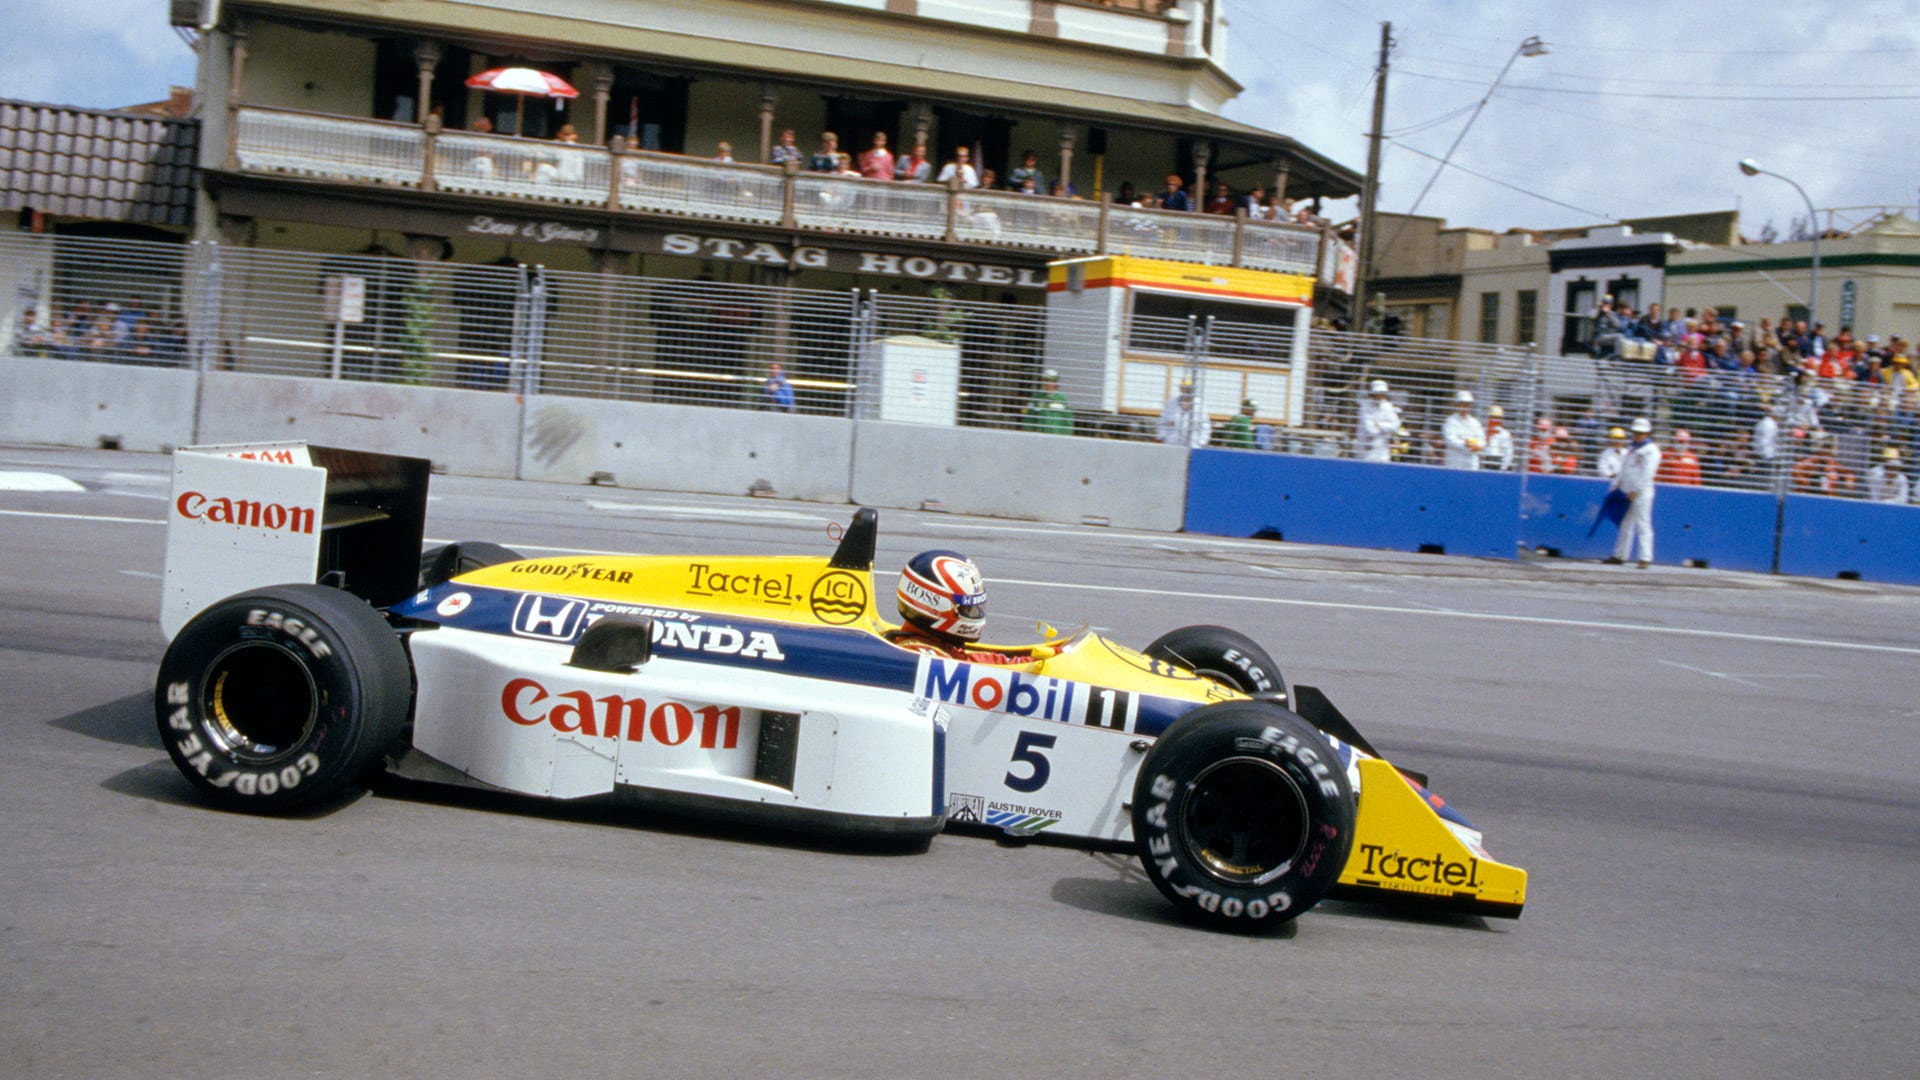 Watch Mansell vs Piquet vs Prost in our re-run of the 1986 Australian Grand Prix Formula 1®